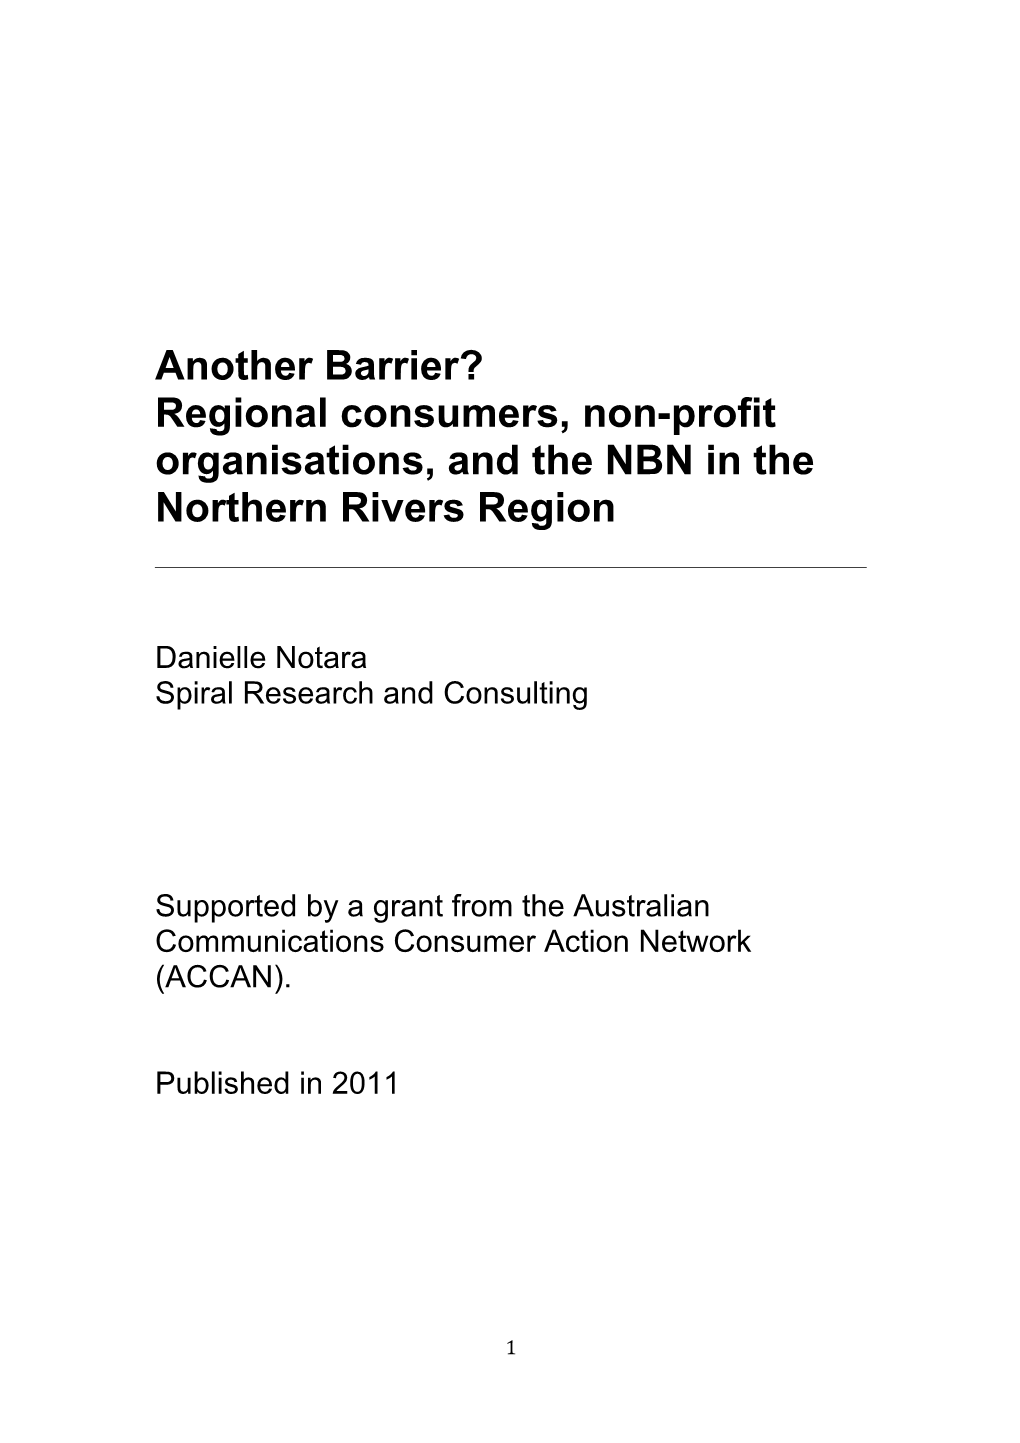 Regional Consumers, Non-Profit Organisations, and the NBN in the Northern Rivers Region